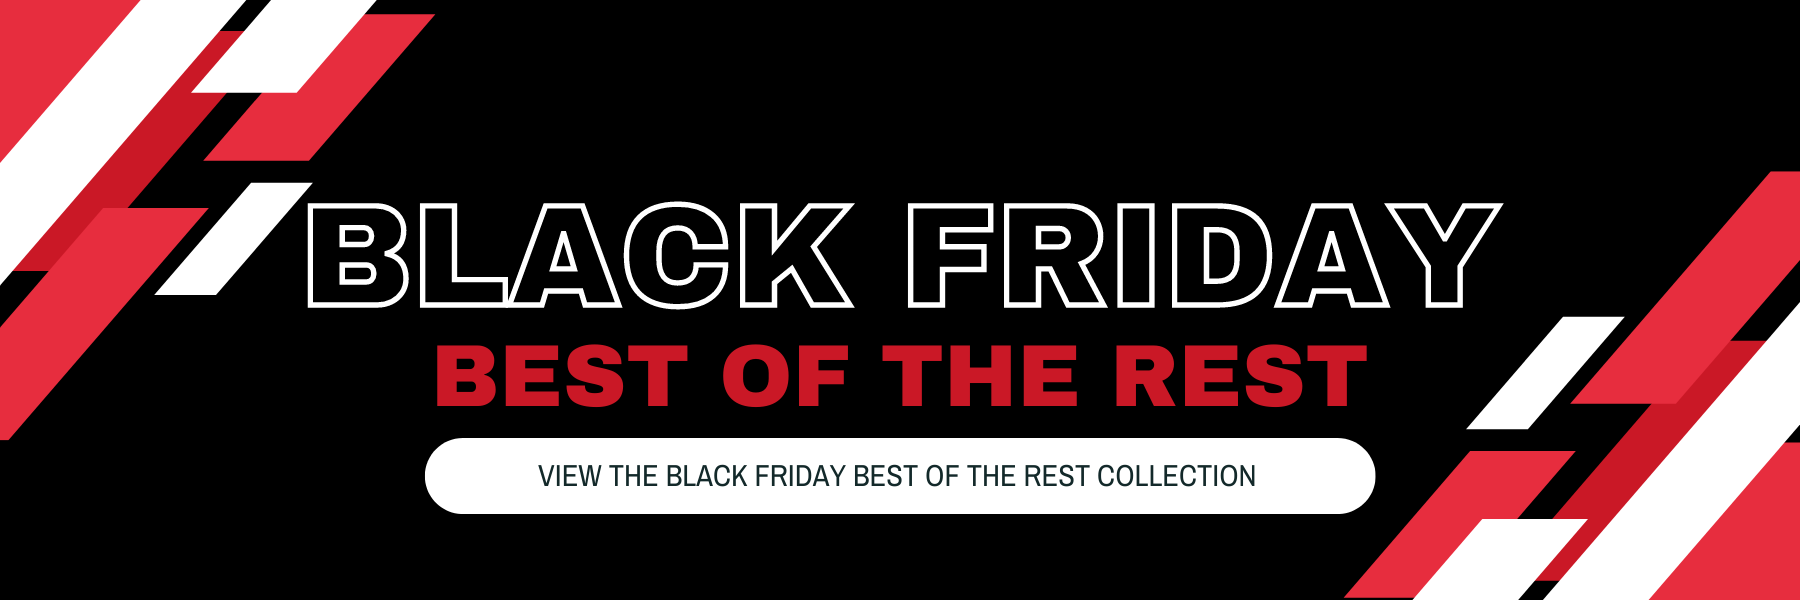 Black Friday Best Of The Rest Deals